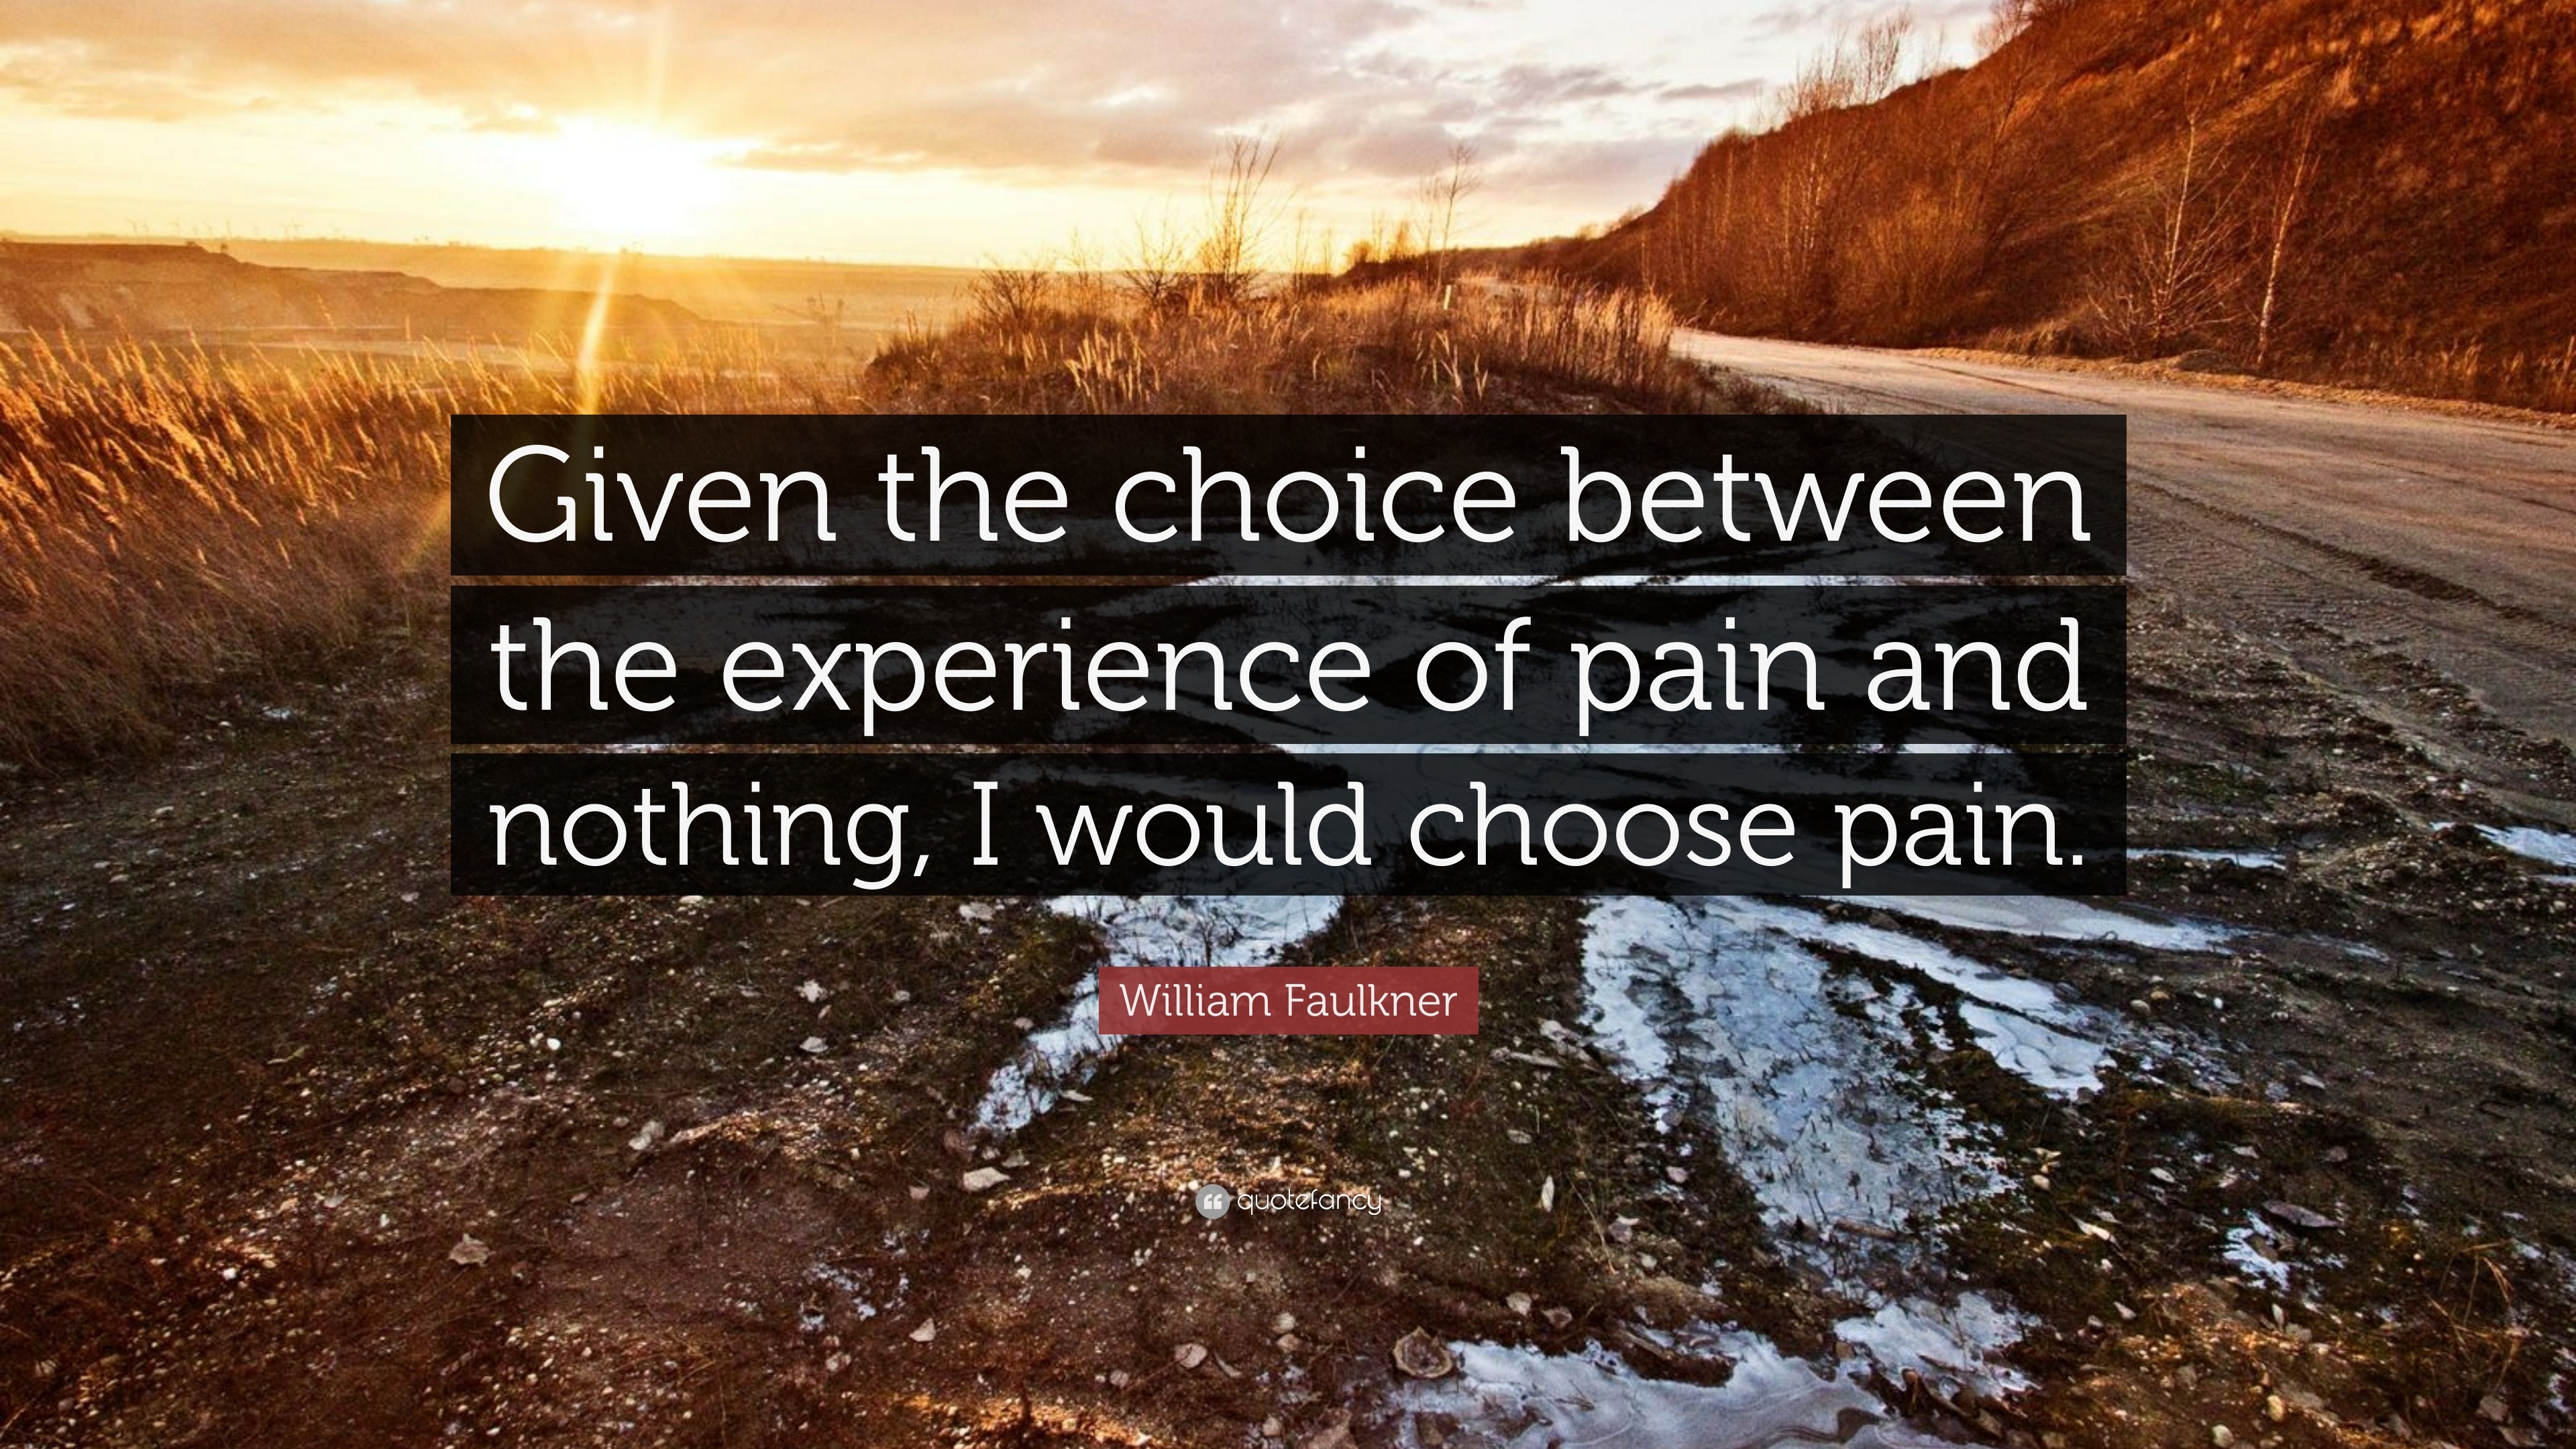 William Faulkner Quote: “Given the choice between the experience of ...